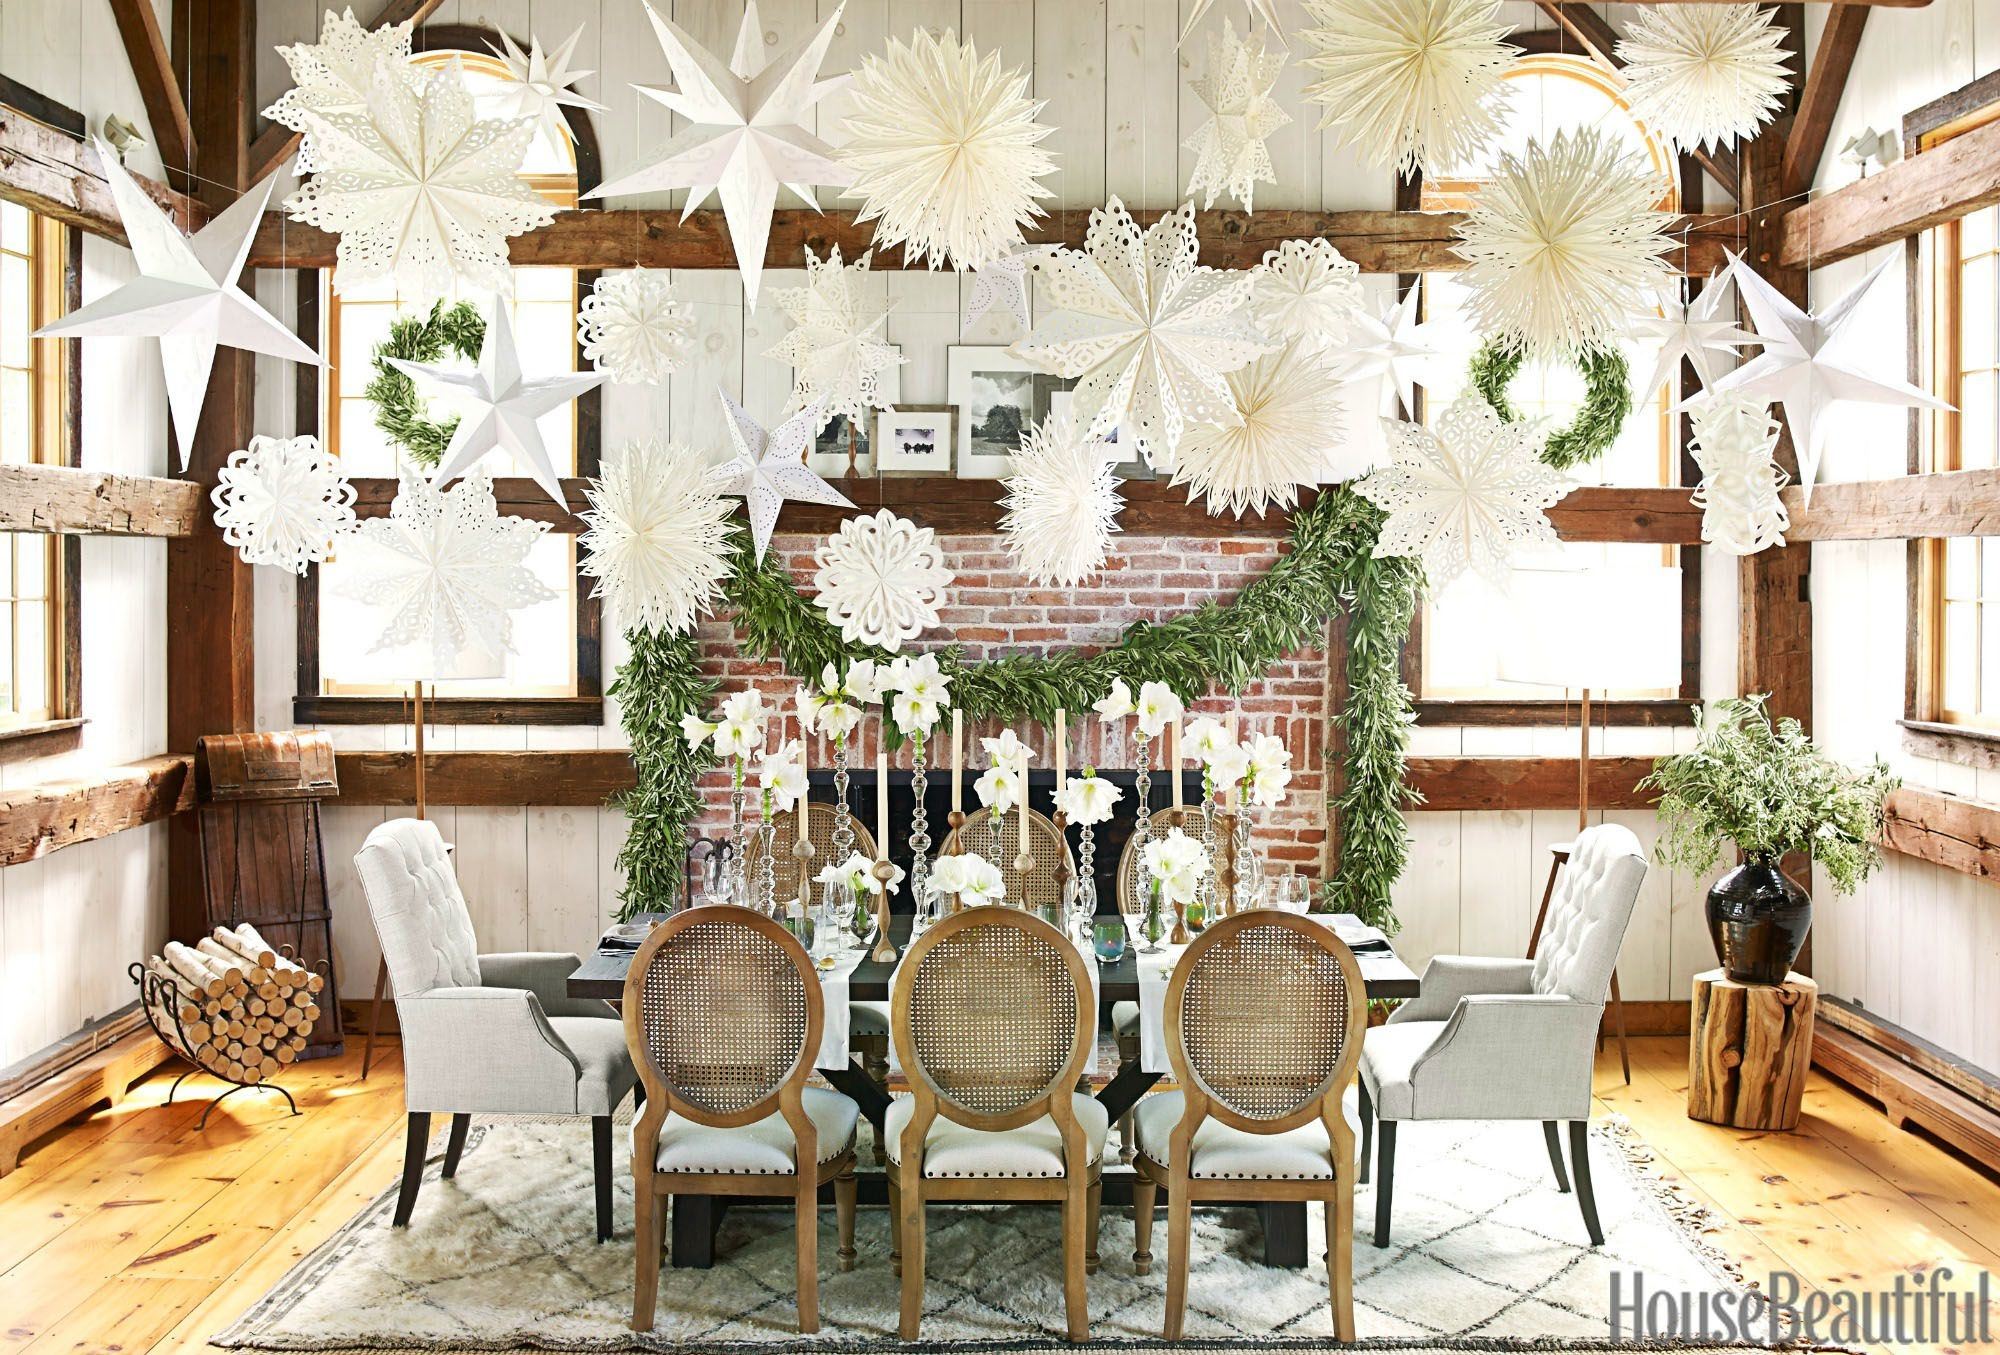 The Best Christmas Decorating Ideas for Your Dining Room Decor | www